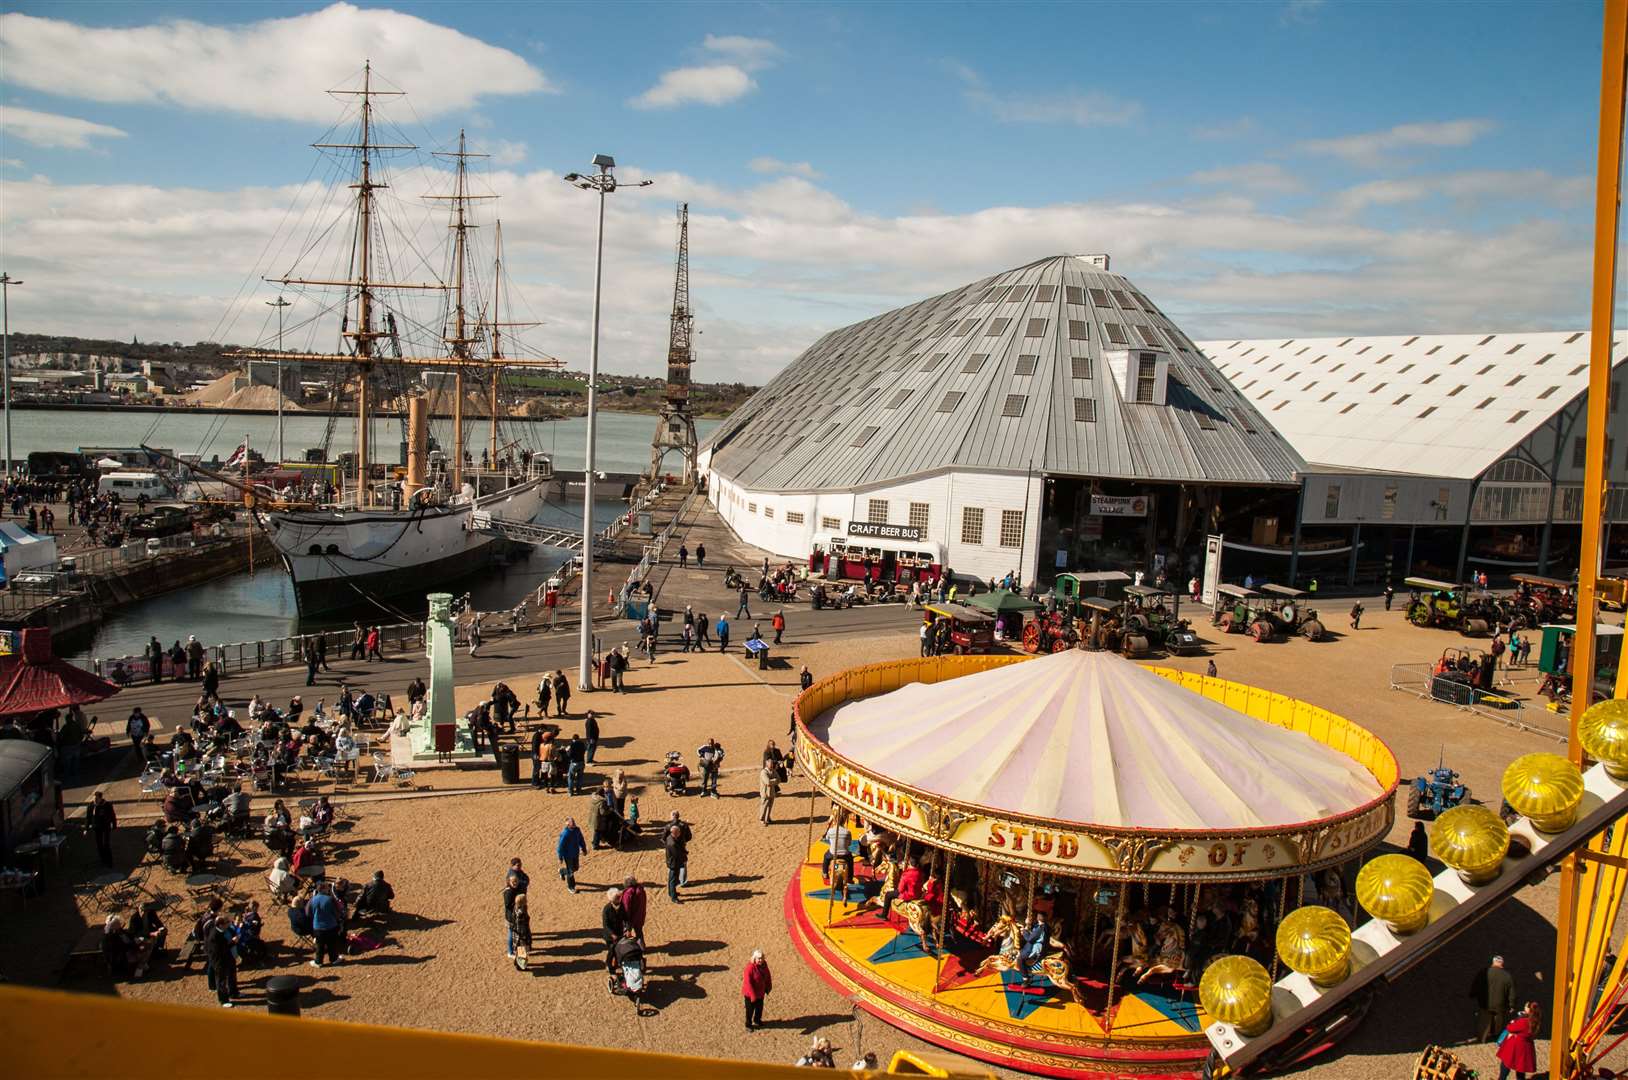 Chatham Historic Dockyard will reopen to visitors this weekend